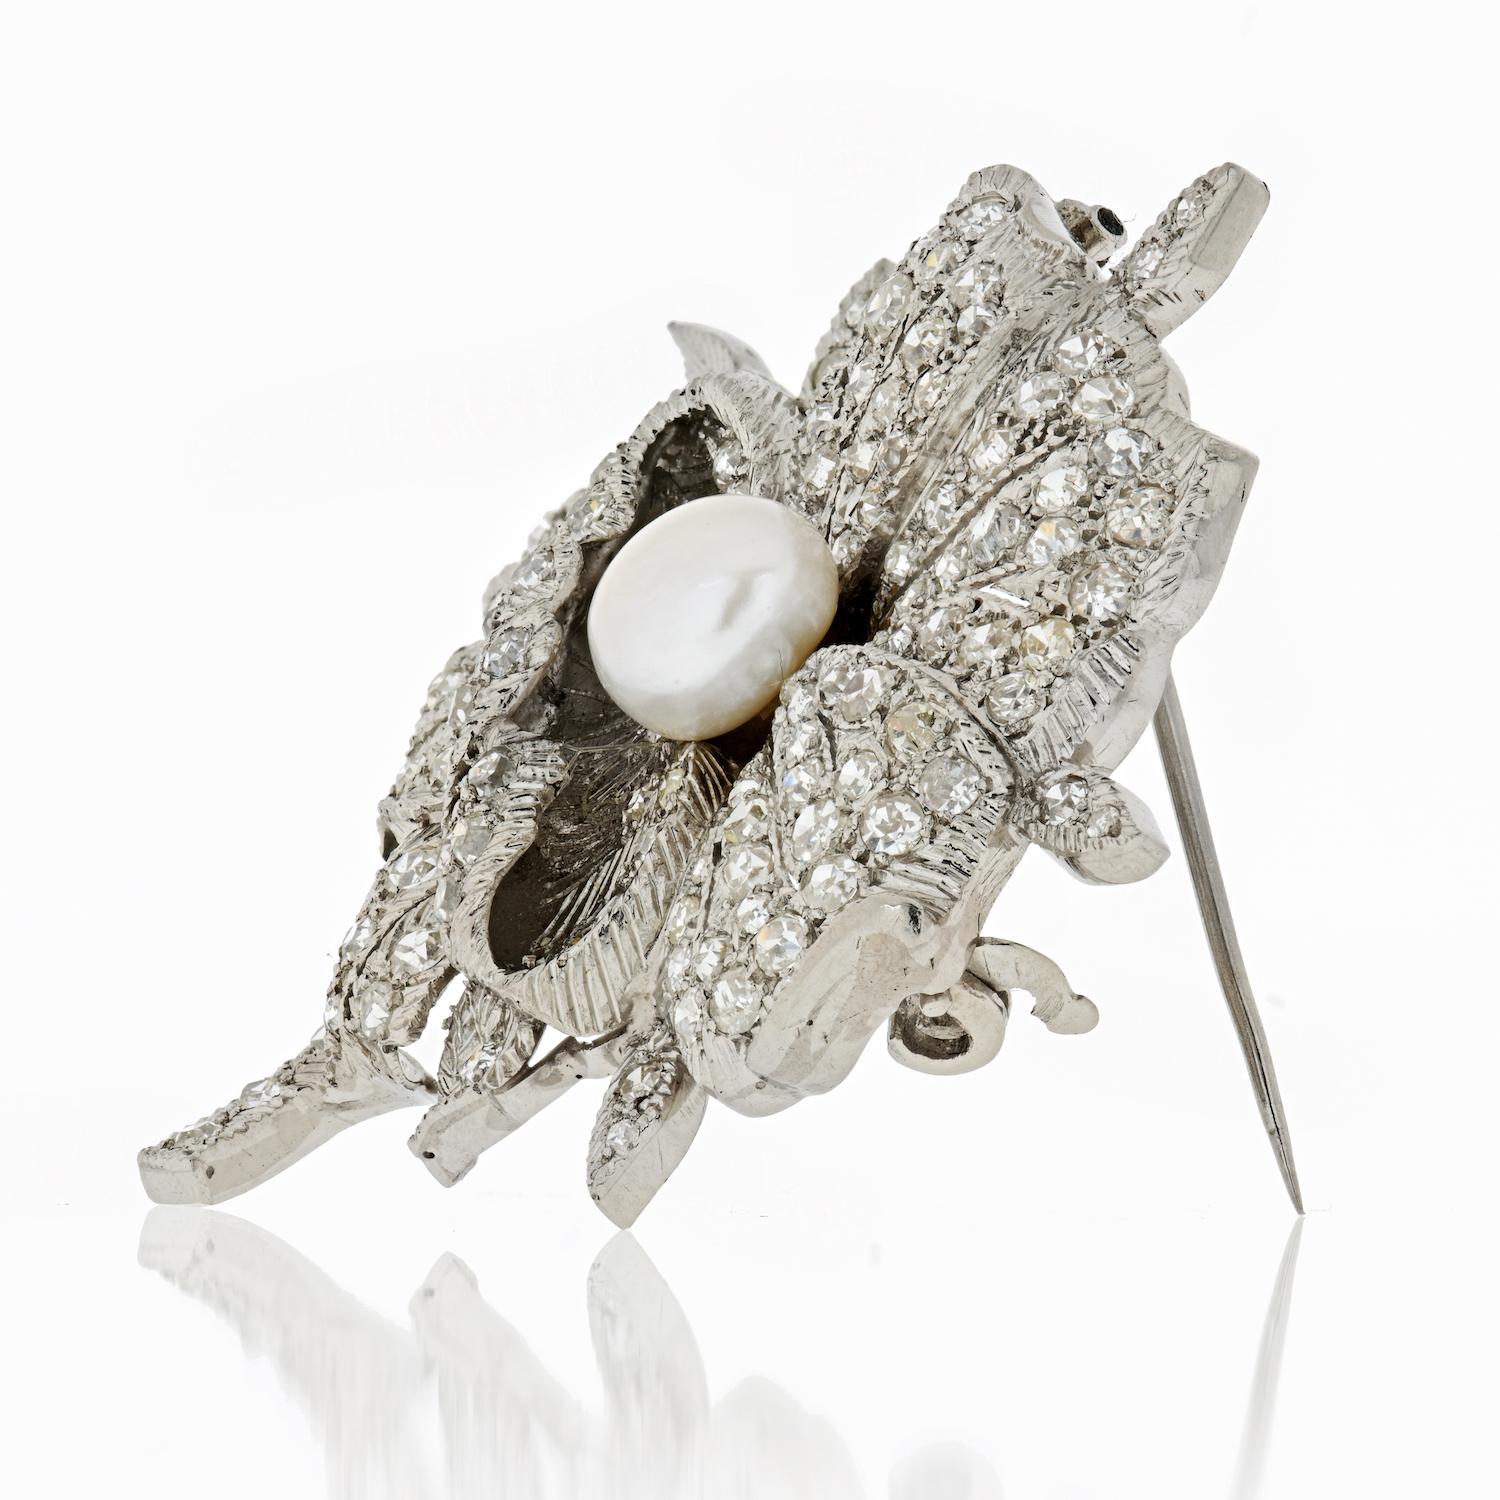 This fine Art Deco brooch features a natural off white pearl and amid beautifully decorated old single-cut diamond petals. The brooch invokes the look of a beautiful flower with its pearls creating a lovely glow among the old single-cuts encrusted